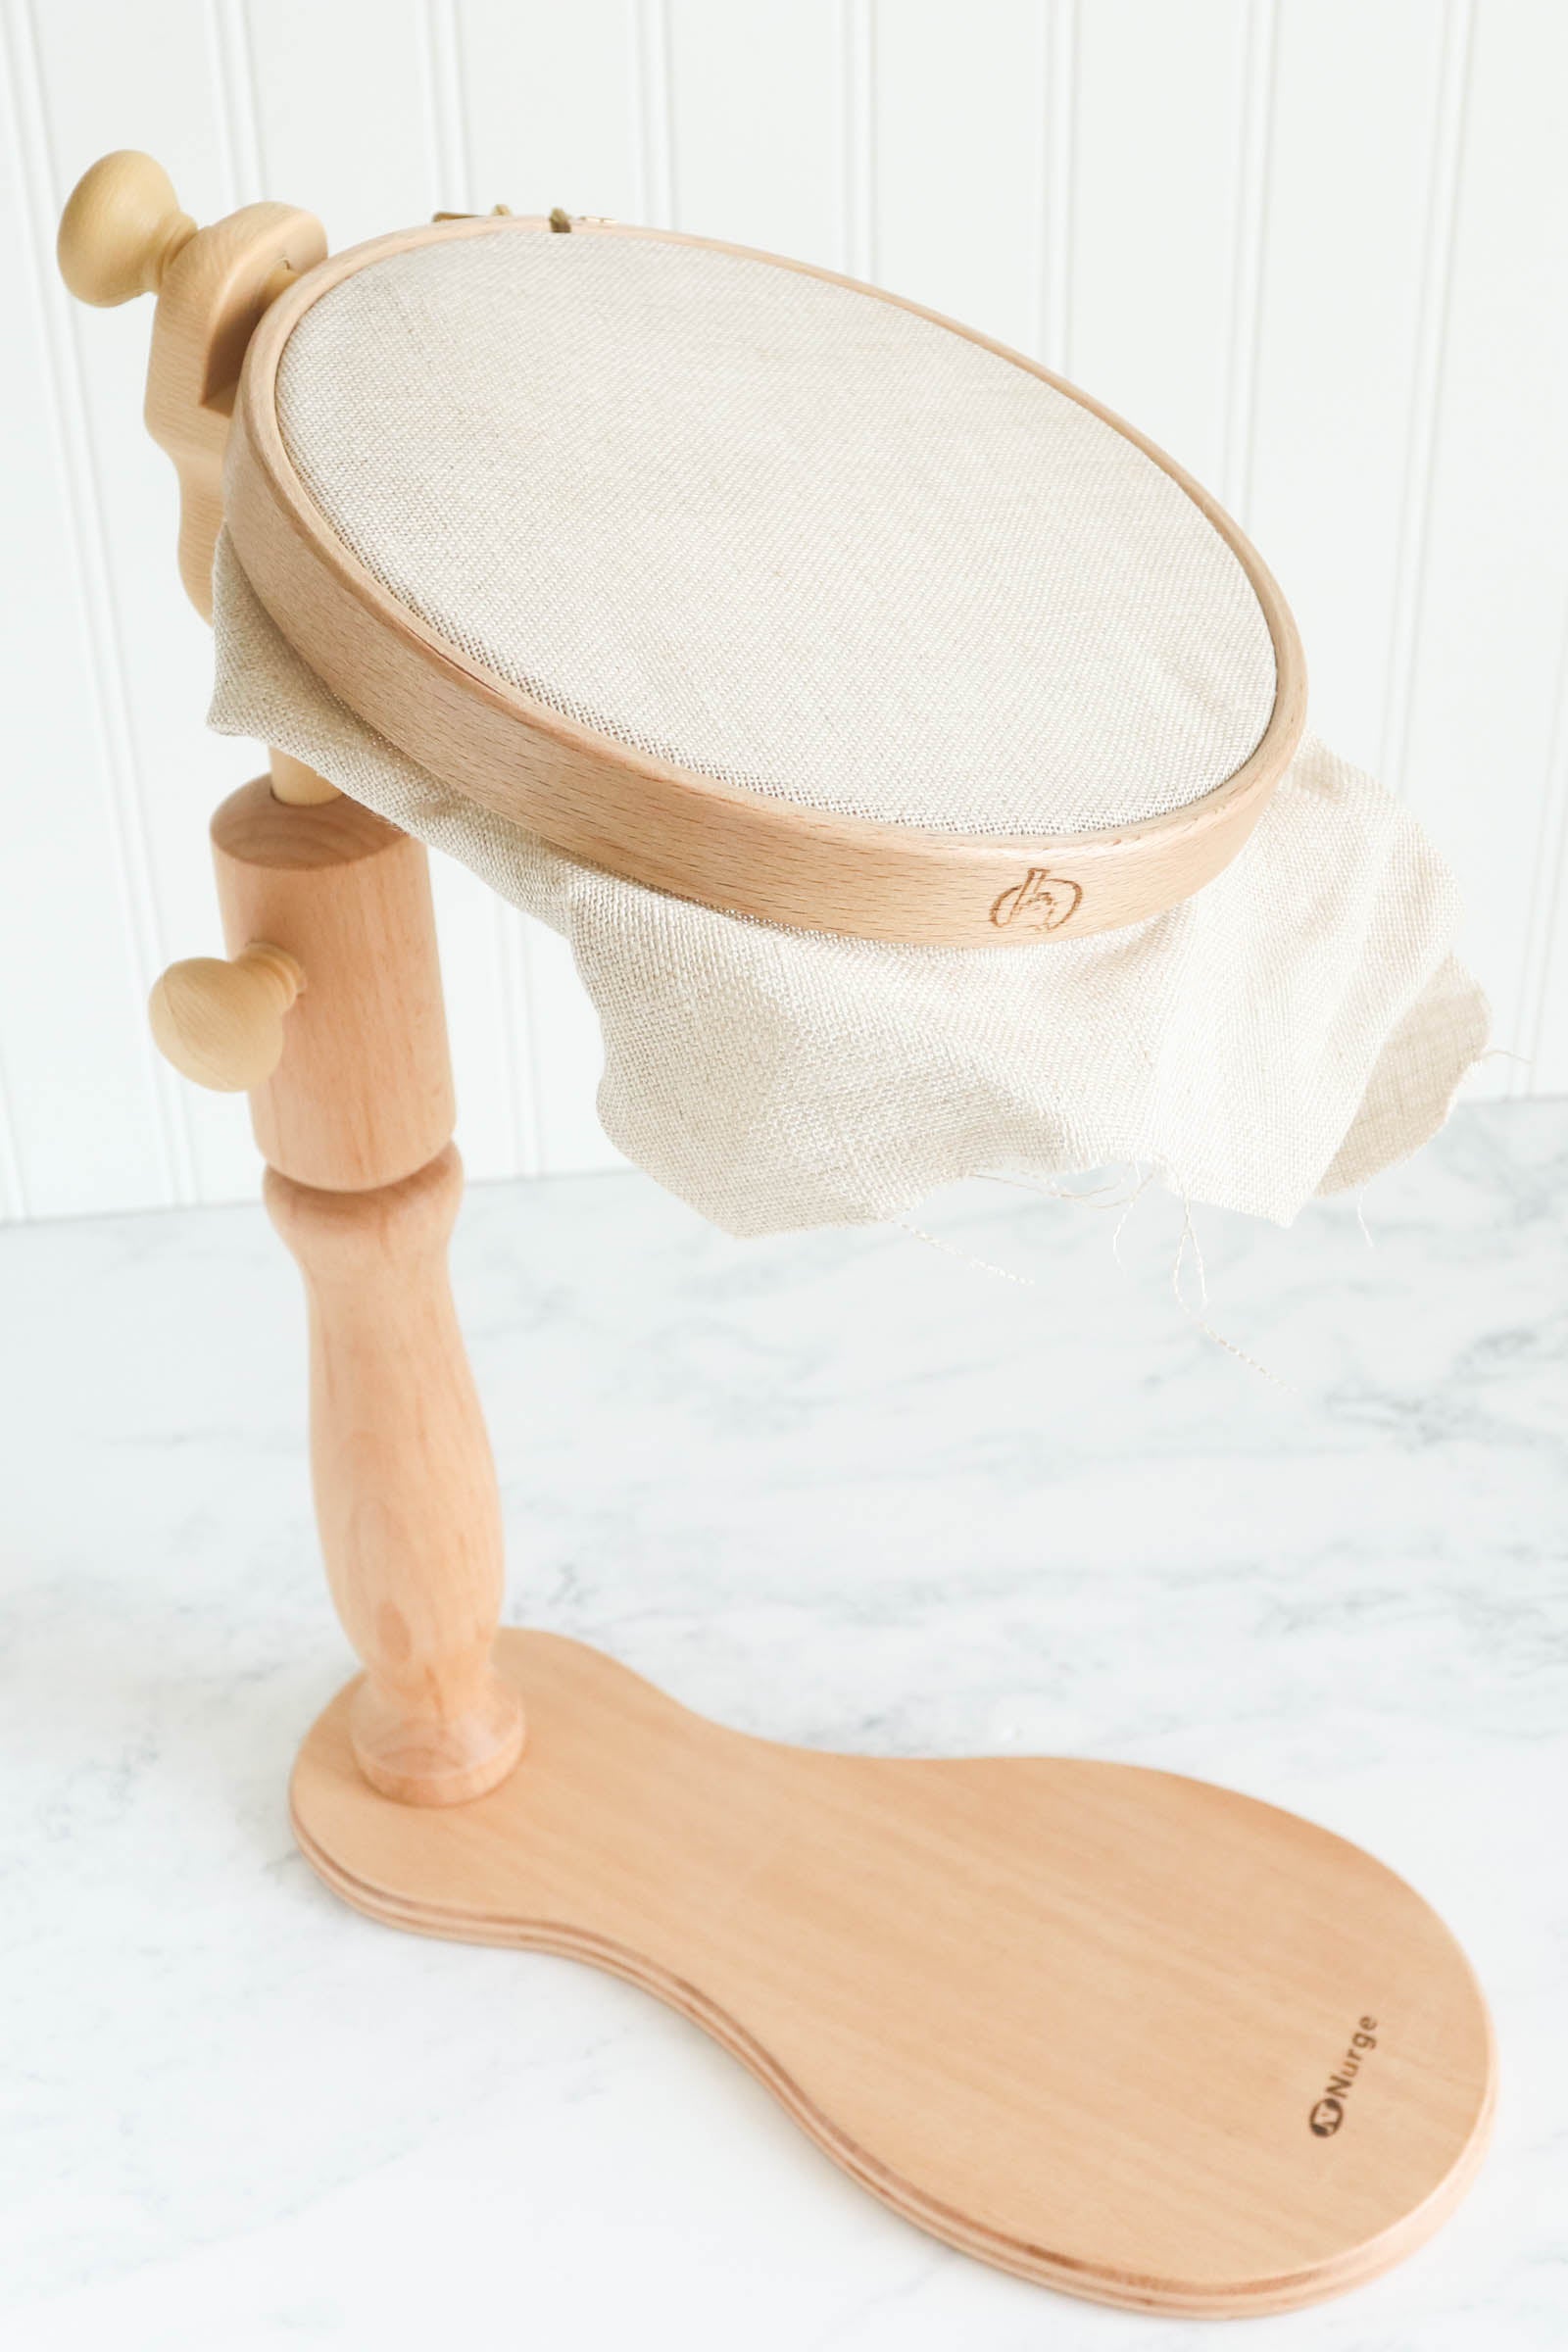 Adjustable Embroidery Hoop Stand Wood Stitch Hoop Holder Upgraded  Embroidery